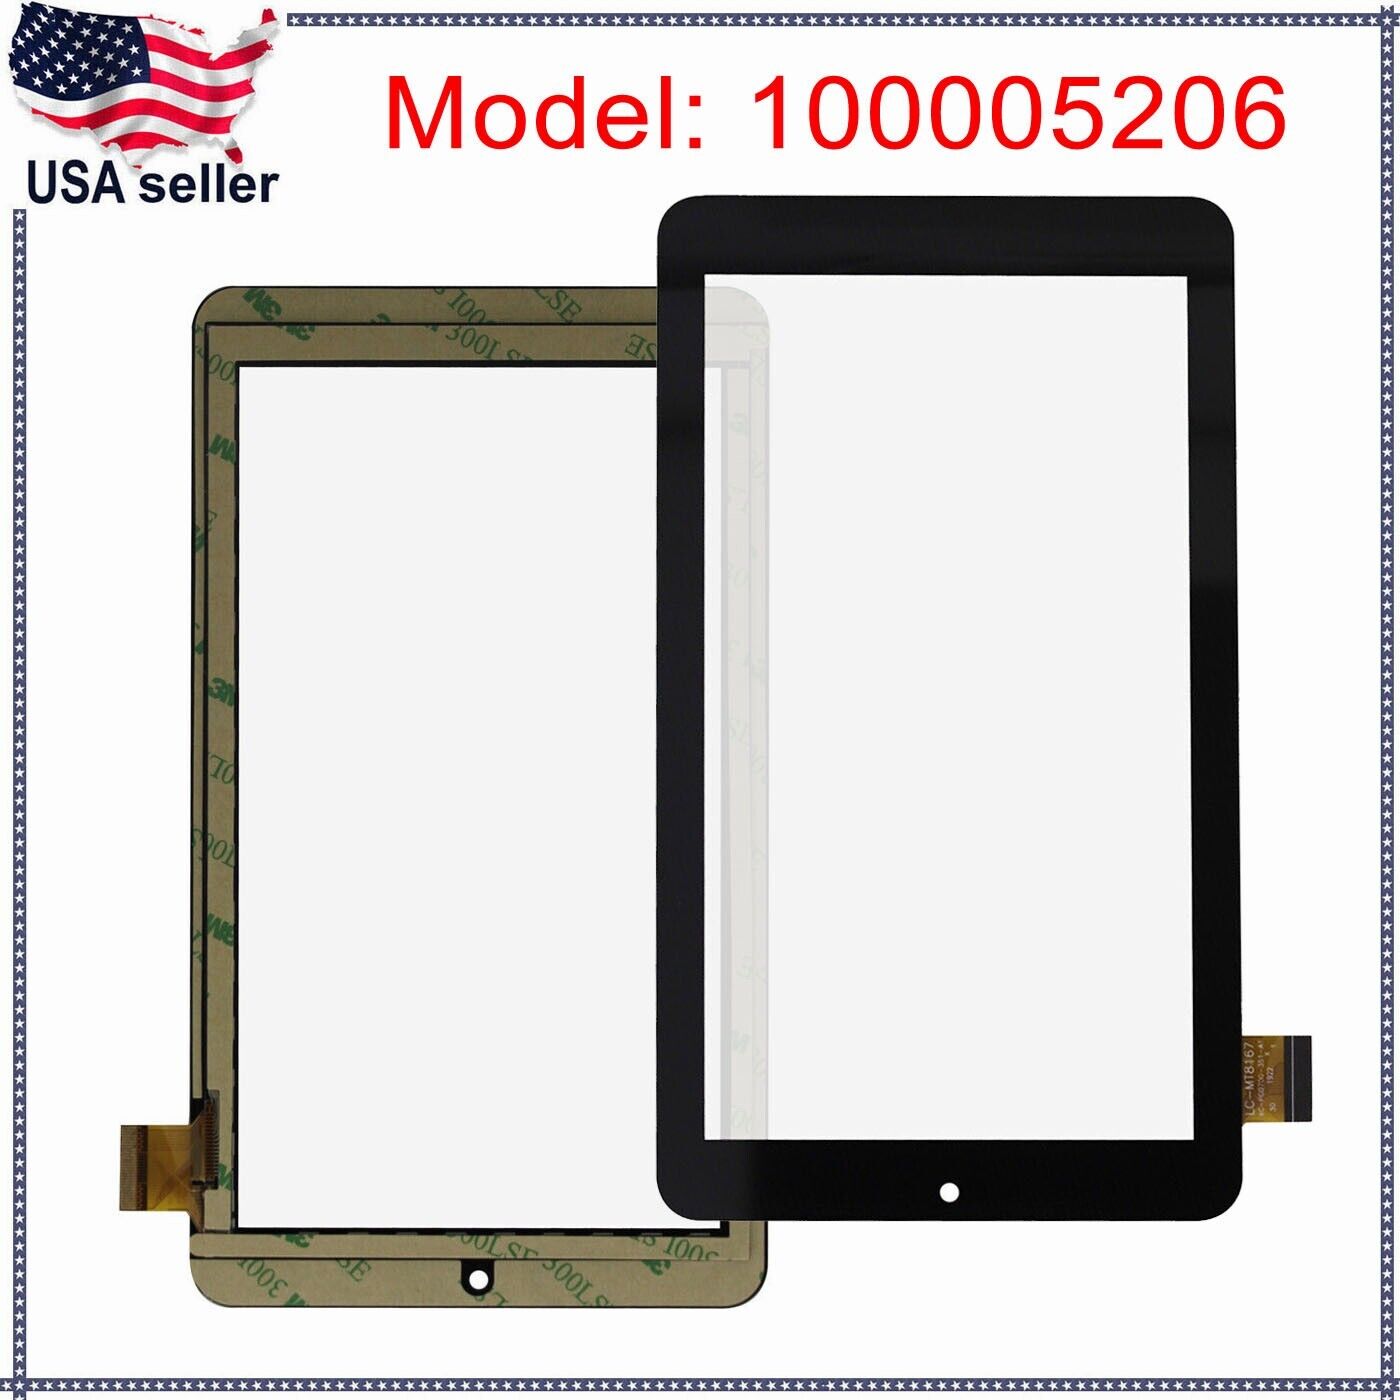 New 7 inch Touch Screen Digitizer Glass For ONN Surf 100005206 Tablet PC